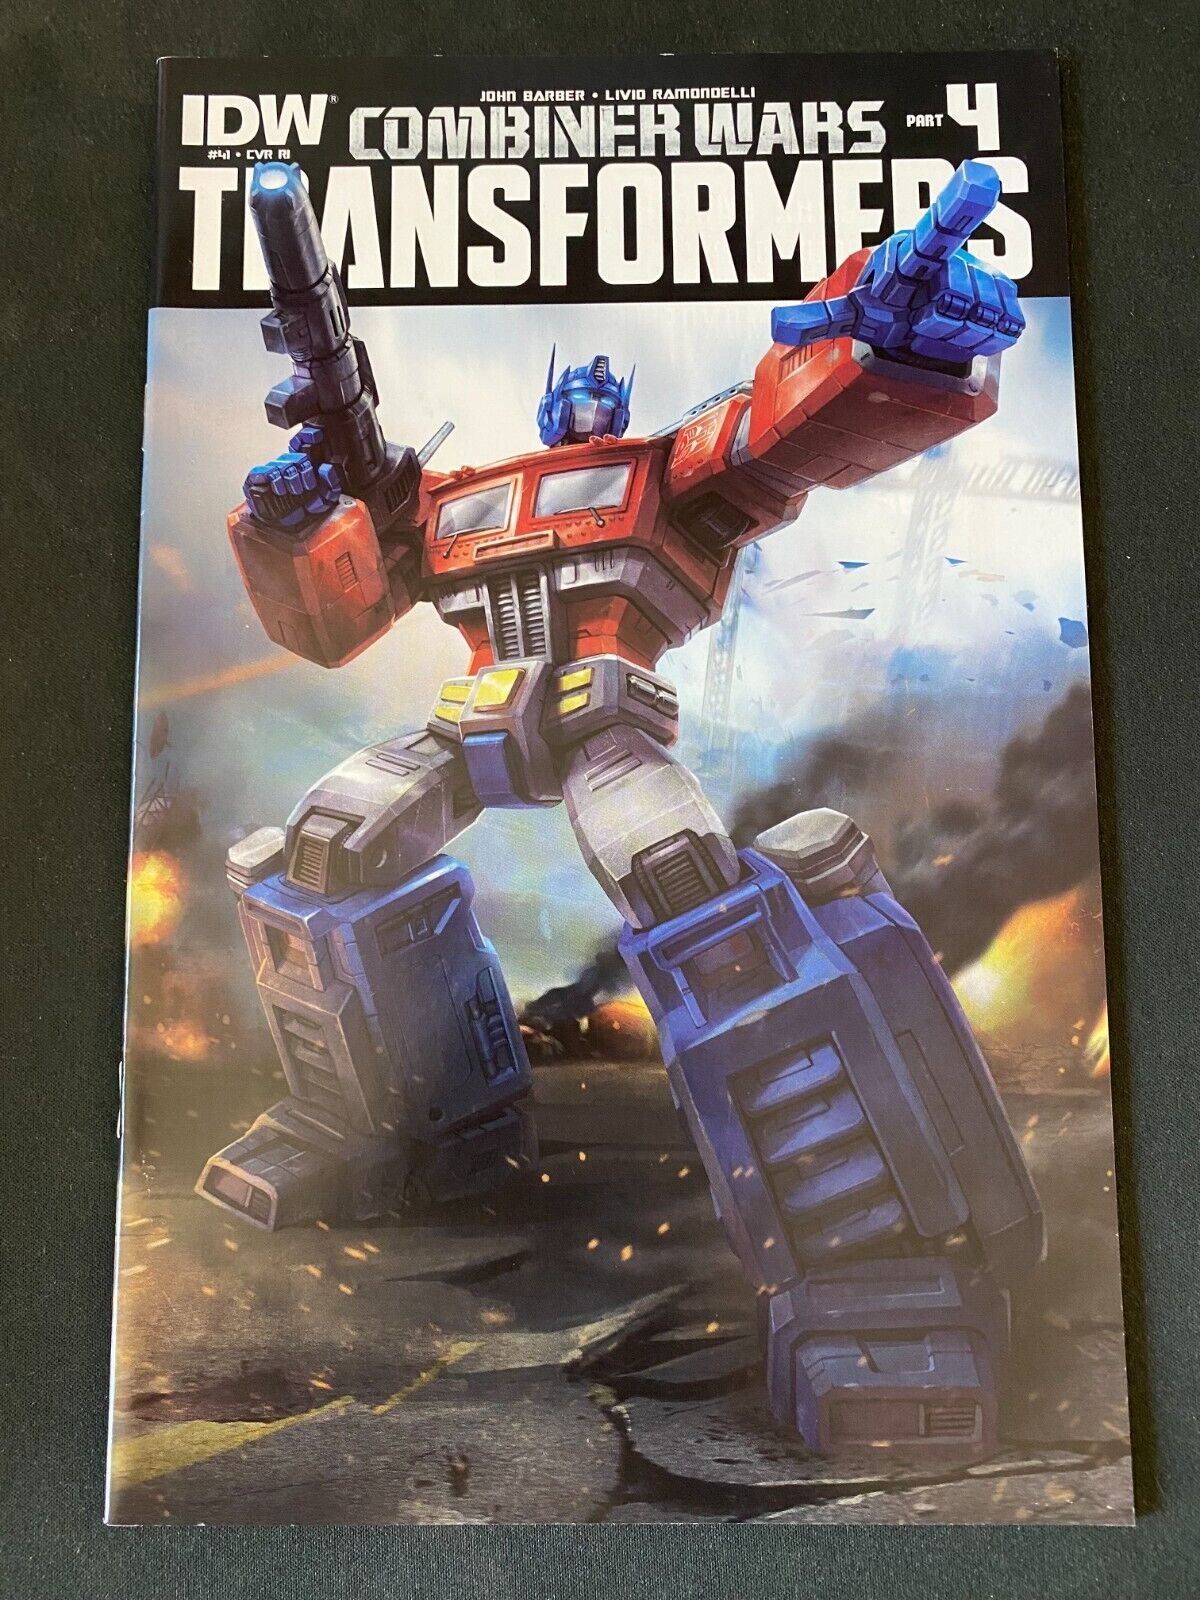 Transformers Robots In Disguise #41 1:10 Retailer Incentive Variant IDW